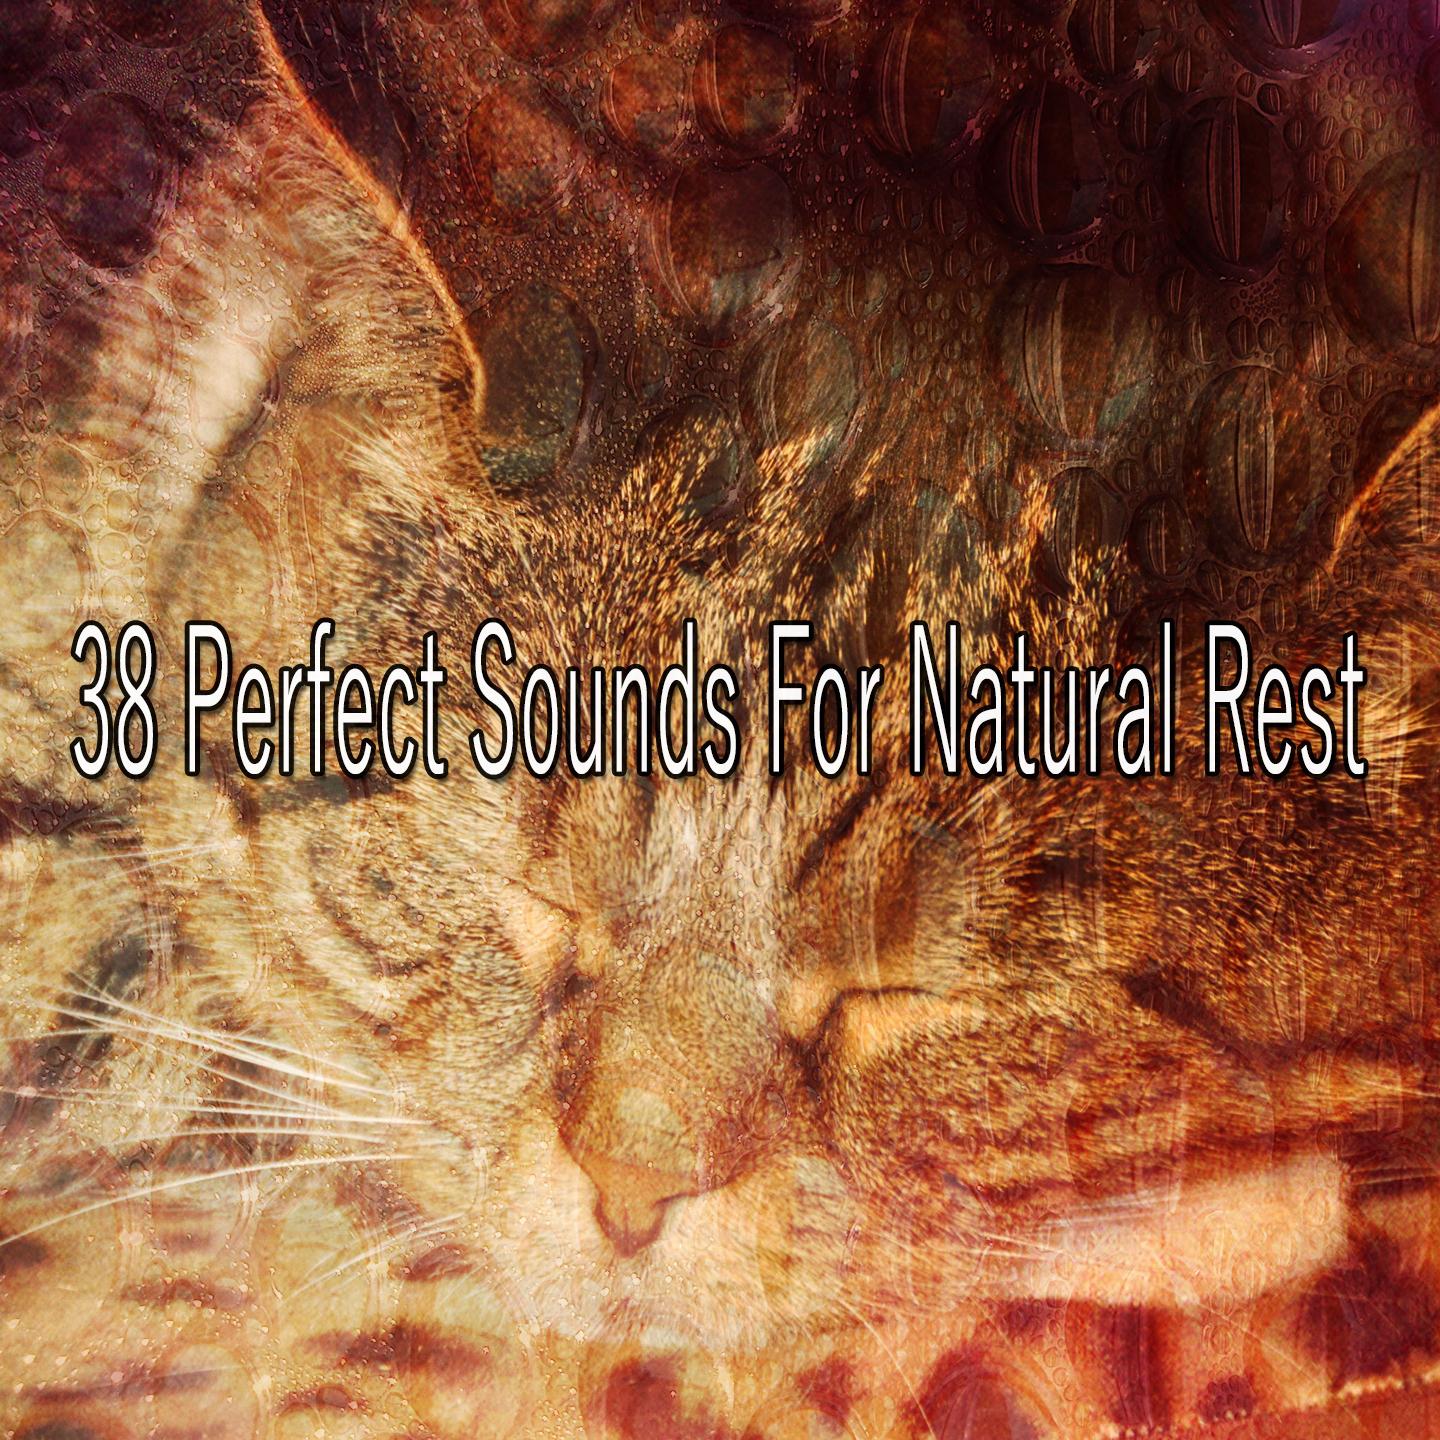 38 Perfect Sounds For Natural Rest